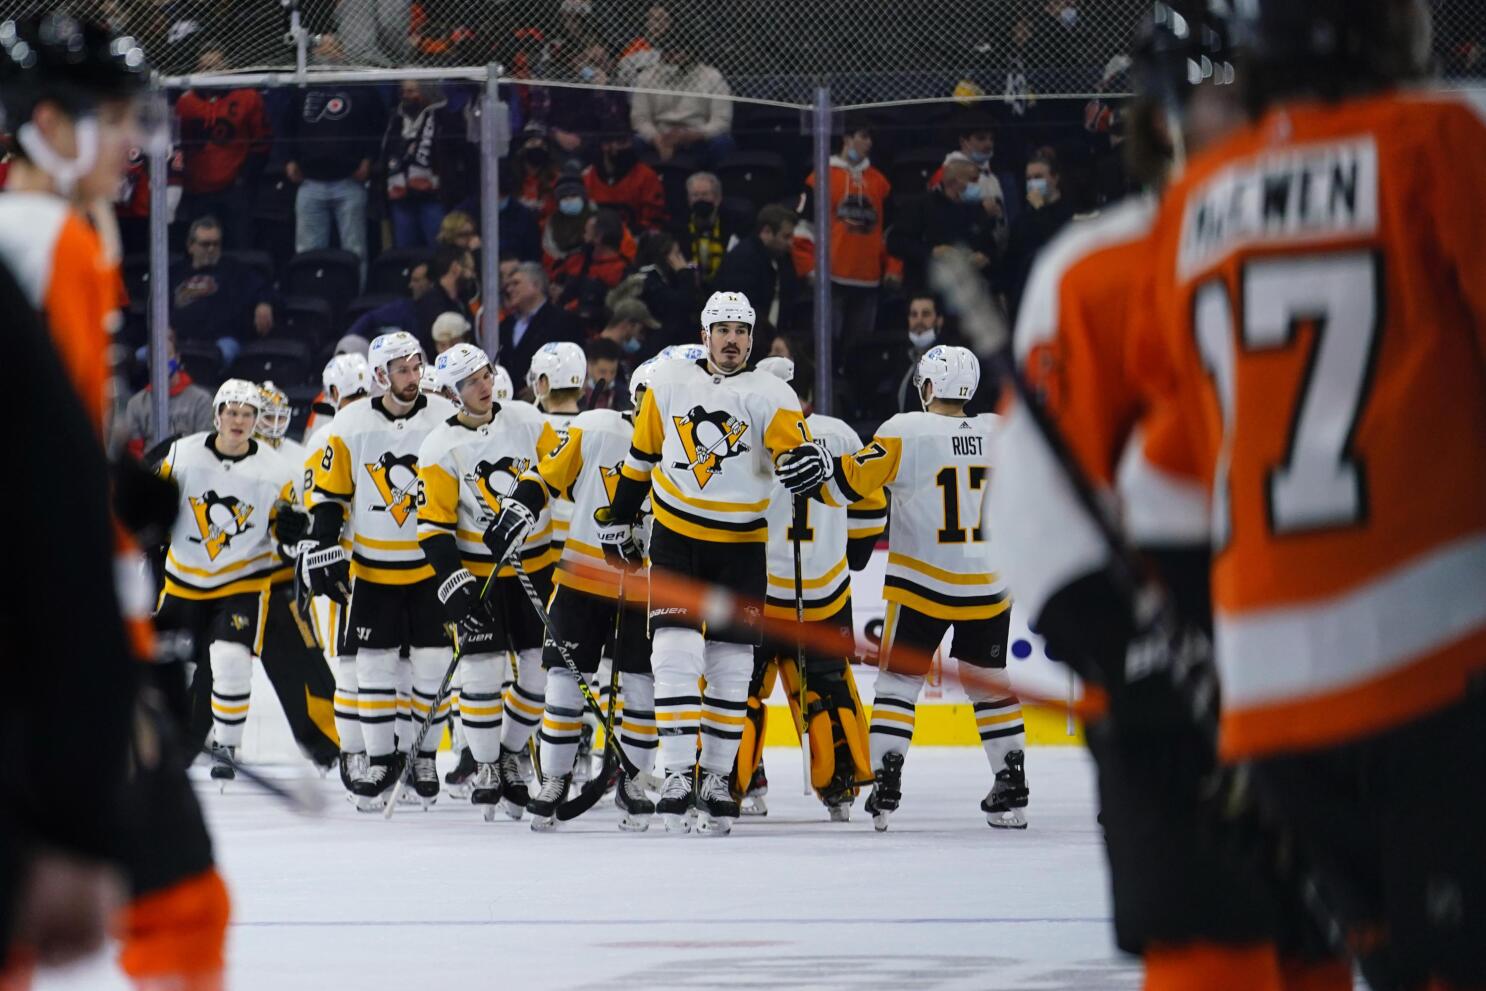 Flyers Take 3rd Straight Loss, Fall to Penguins